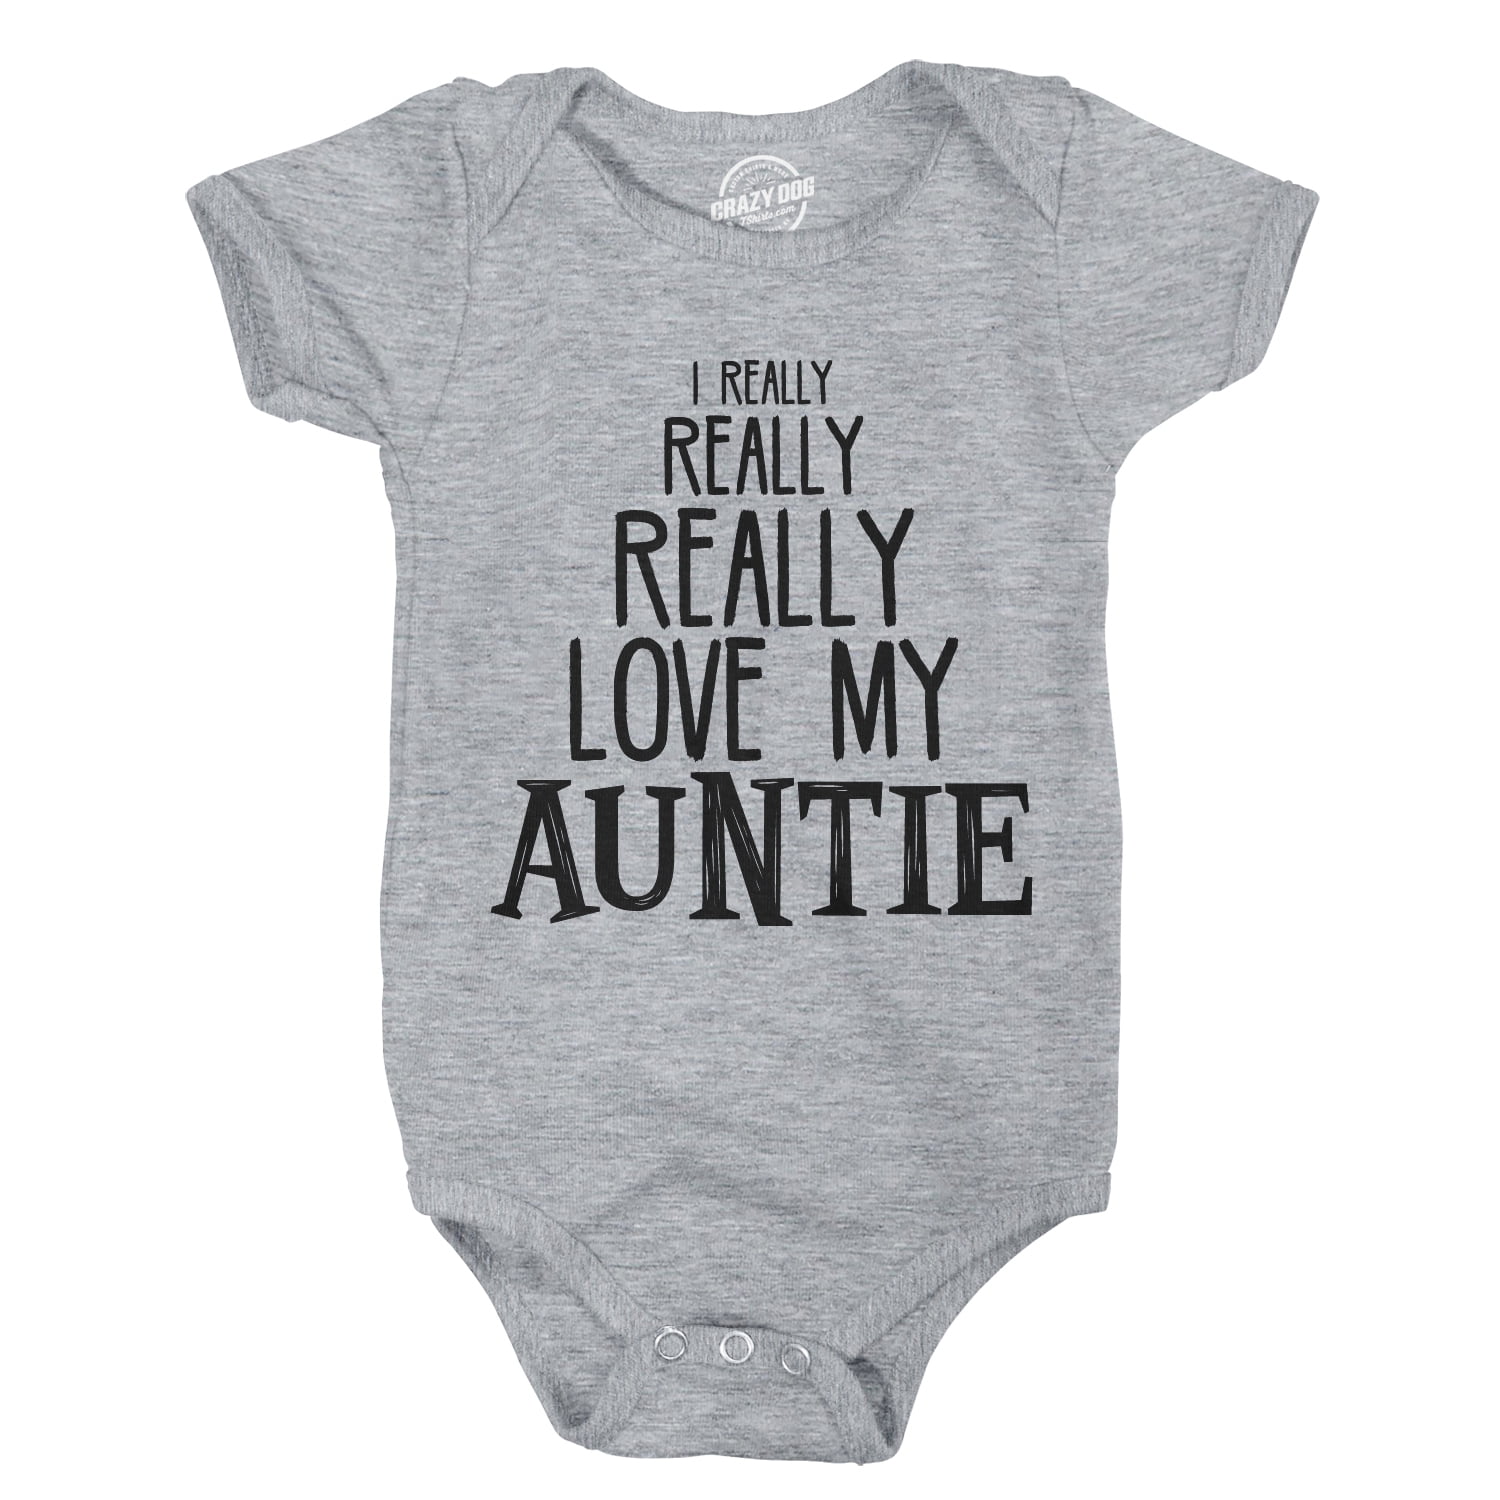 I LOVE MY AUNTIE FLOWER PERSONALISED BABY TODDLER T SHIRT KIDS FUNNY GIFT CUTE 